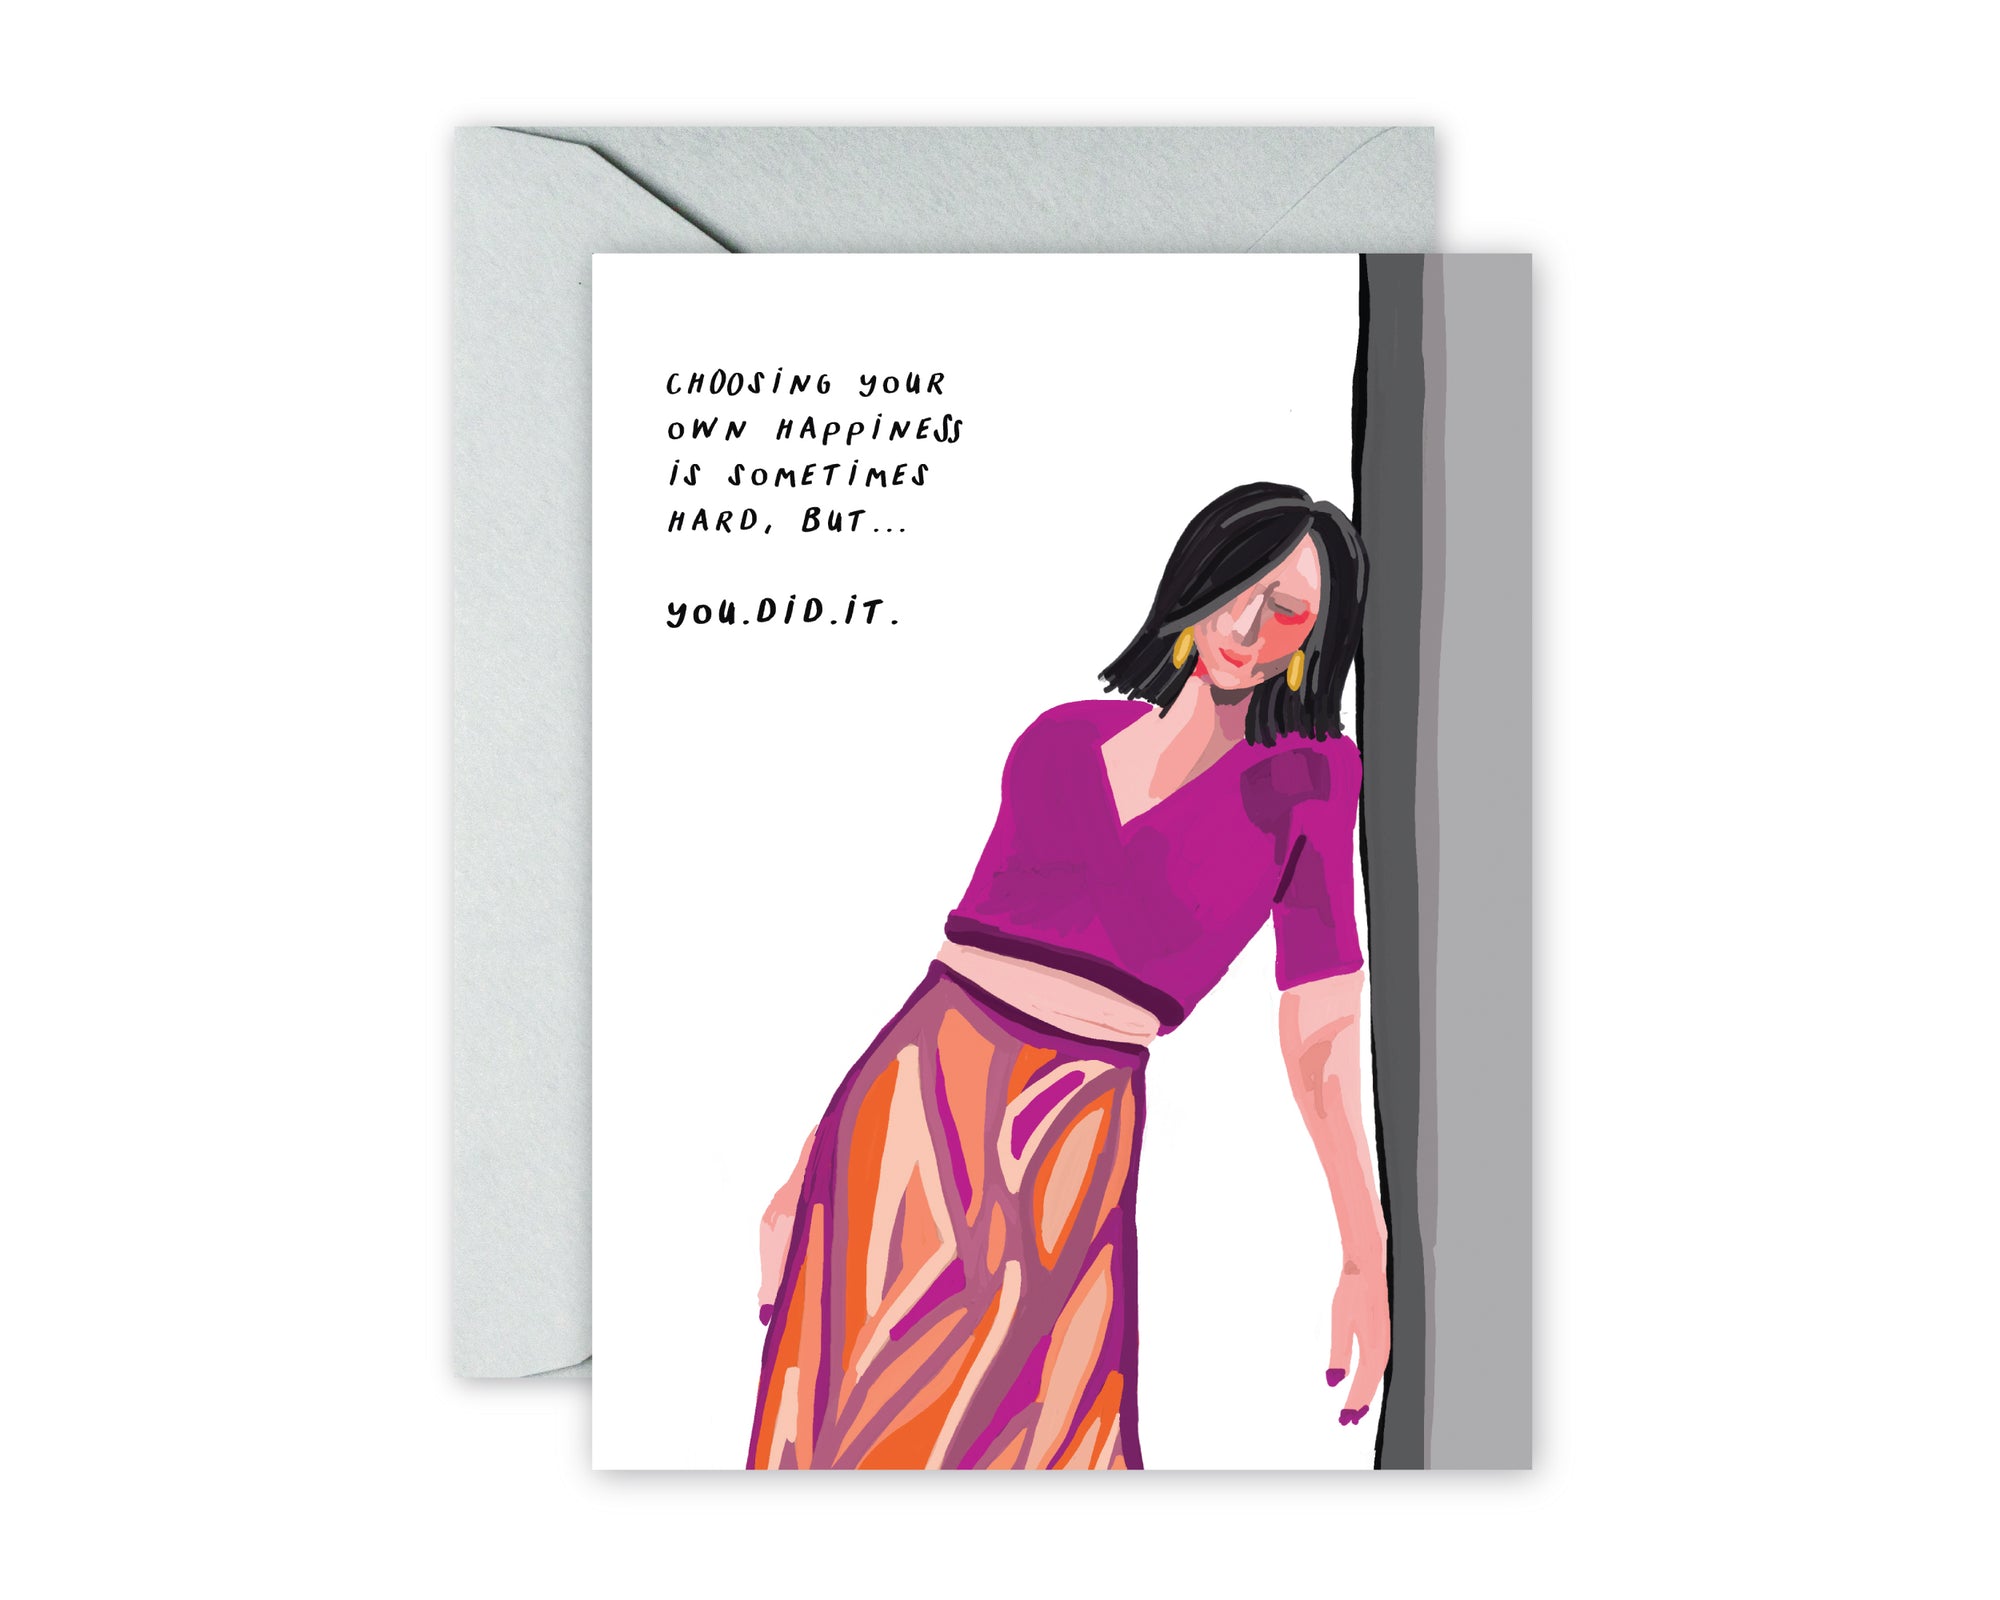 Greeting card with illustrated woman with dark bob, fuschia outfit, gold hoop earrings. CHOOSING YOUR OWN HAPPINESS IS SOMETIMES HARD, BUT...YOU.DID.IT.  Grey envelope.